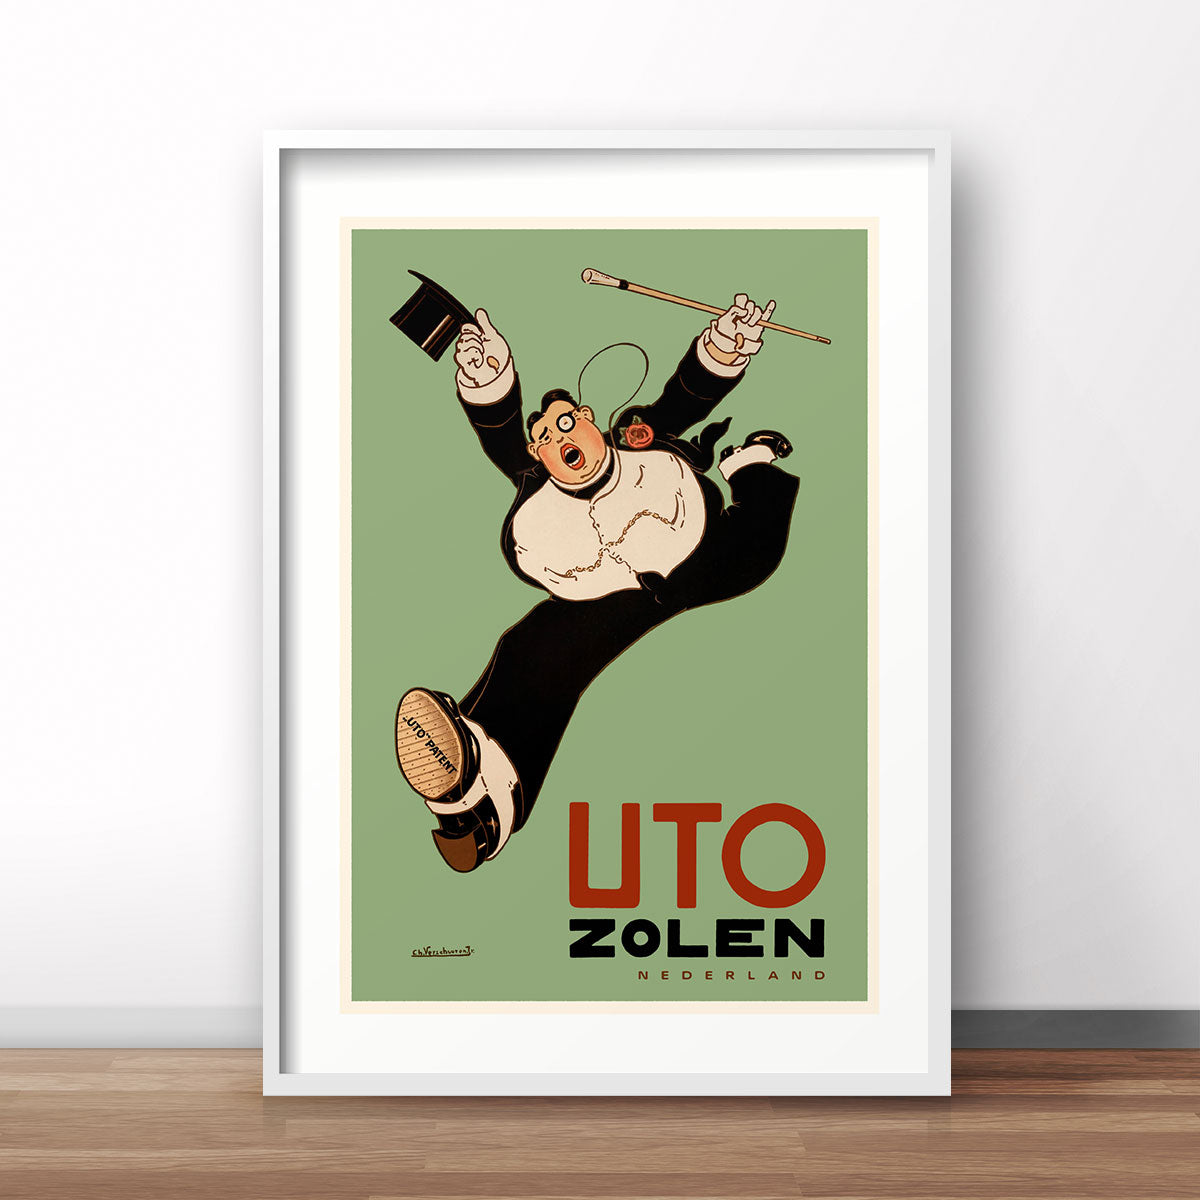 Uto Zolen The Netherlands retro vintage poster print from Places We Luv